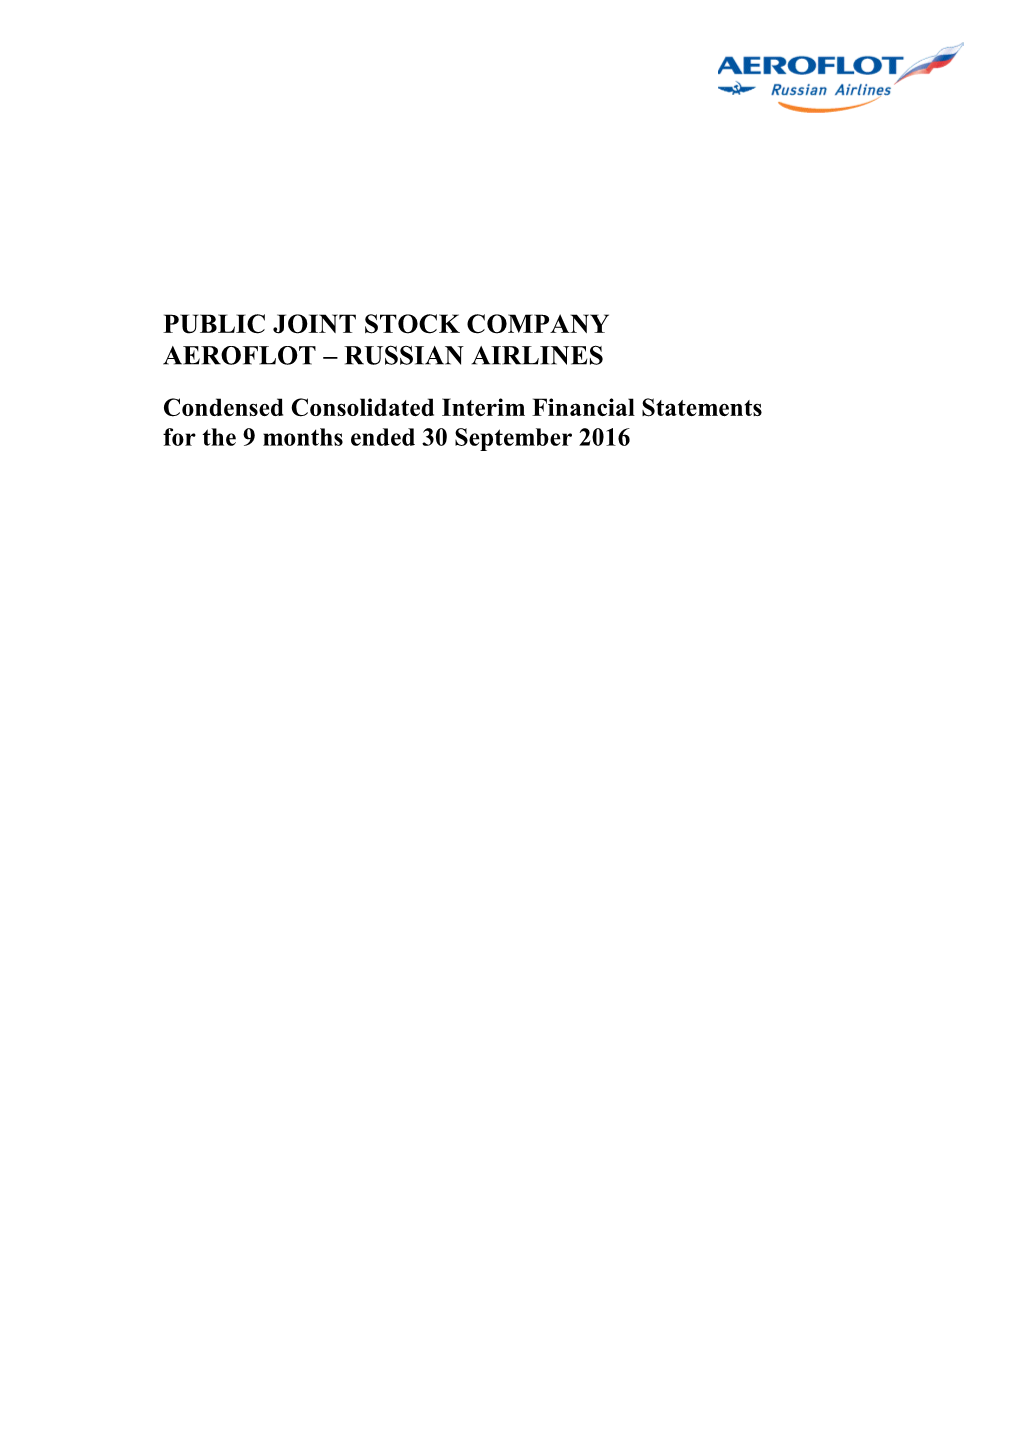 IFRS Financial Statement